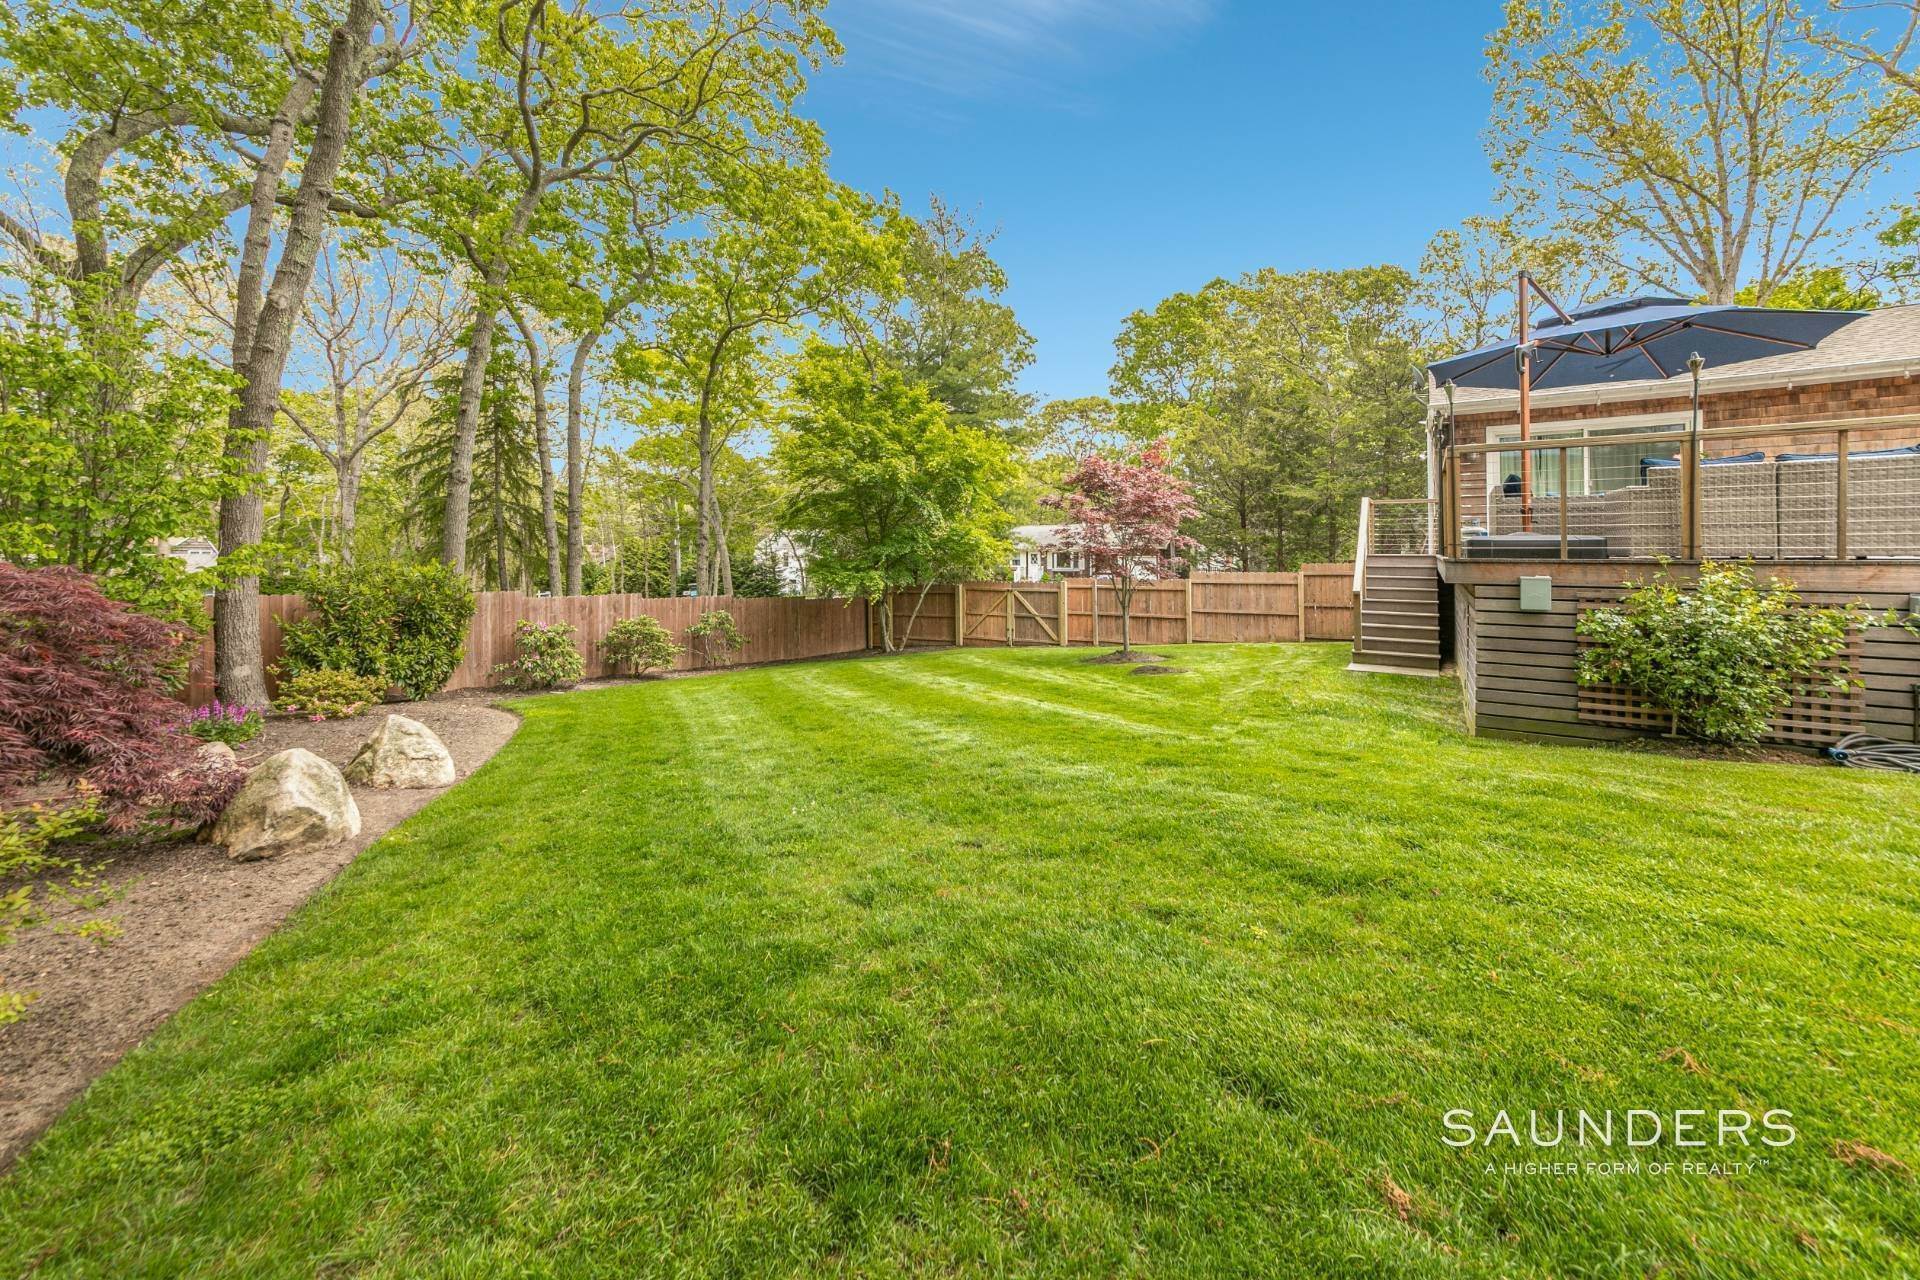 2. Single Family Homes for Sale at Turnkey, Renovated Springs Charmer 11 Borden Place, East Hampton, NY 11937